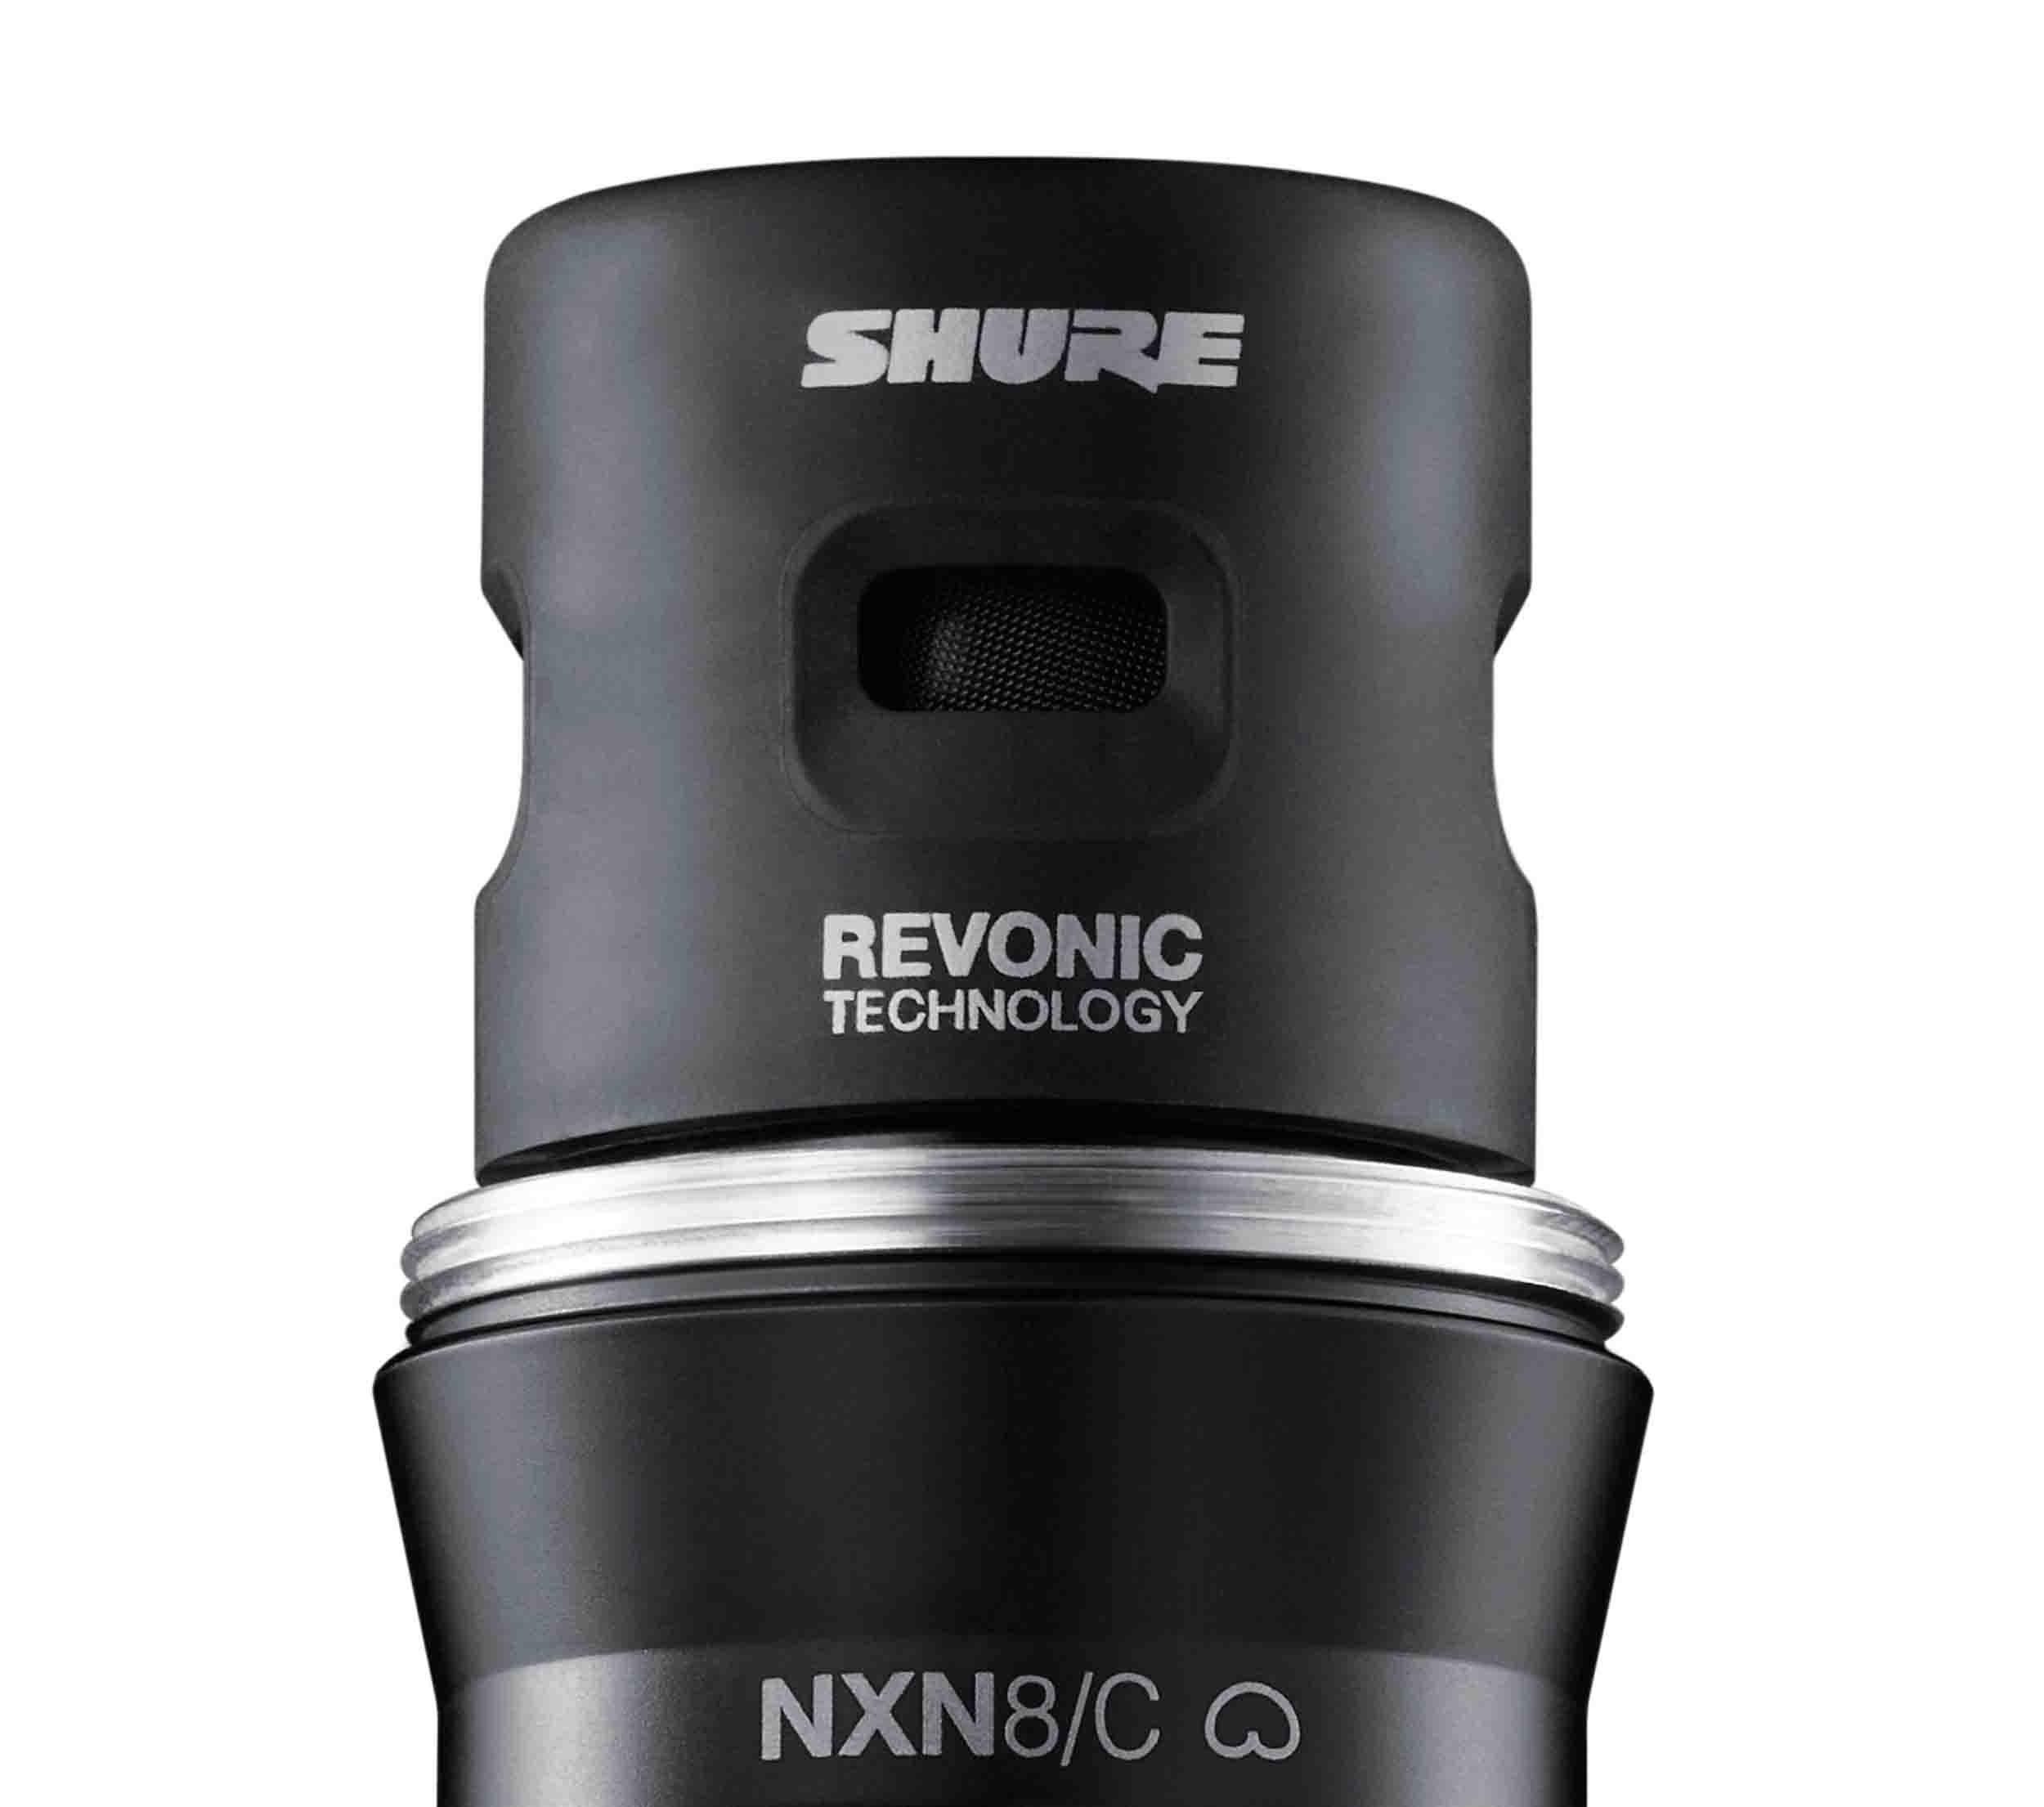 Shure Nexadyne 8/C Cardioid Dynamic Vocal Microphone with Revonic Transducer - Black by Shure